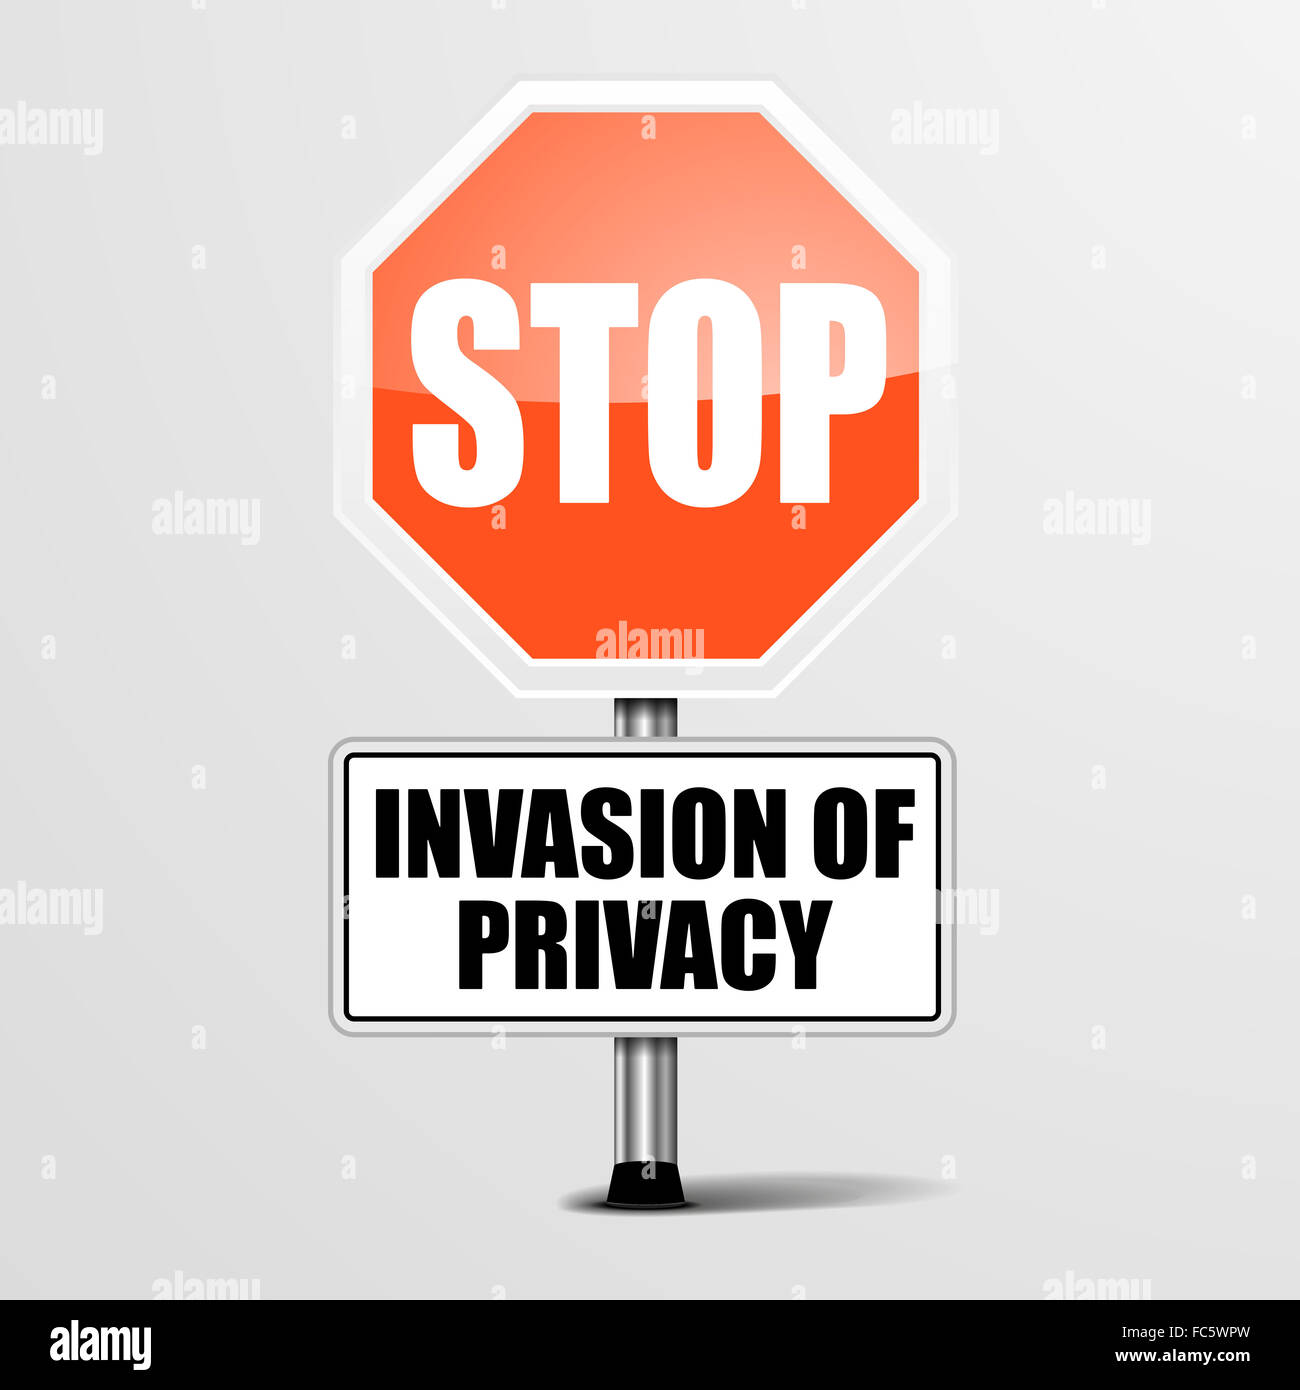 Stop Invasion of Privacy Stock Photo